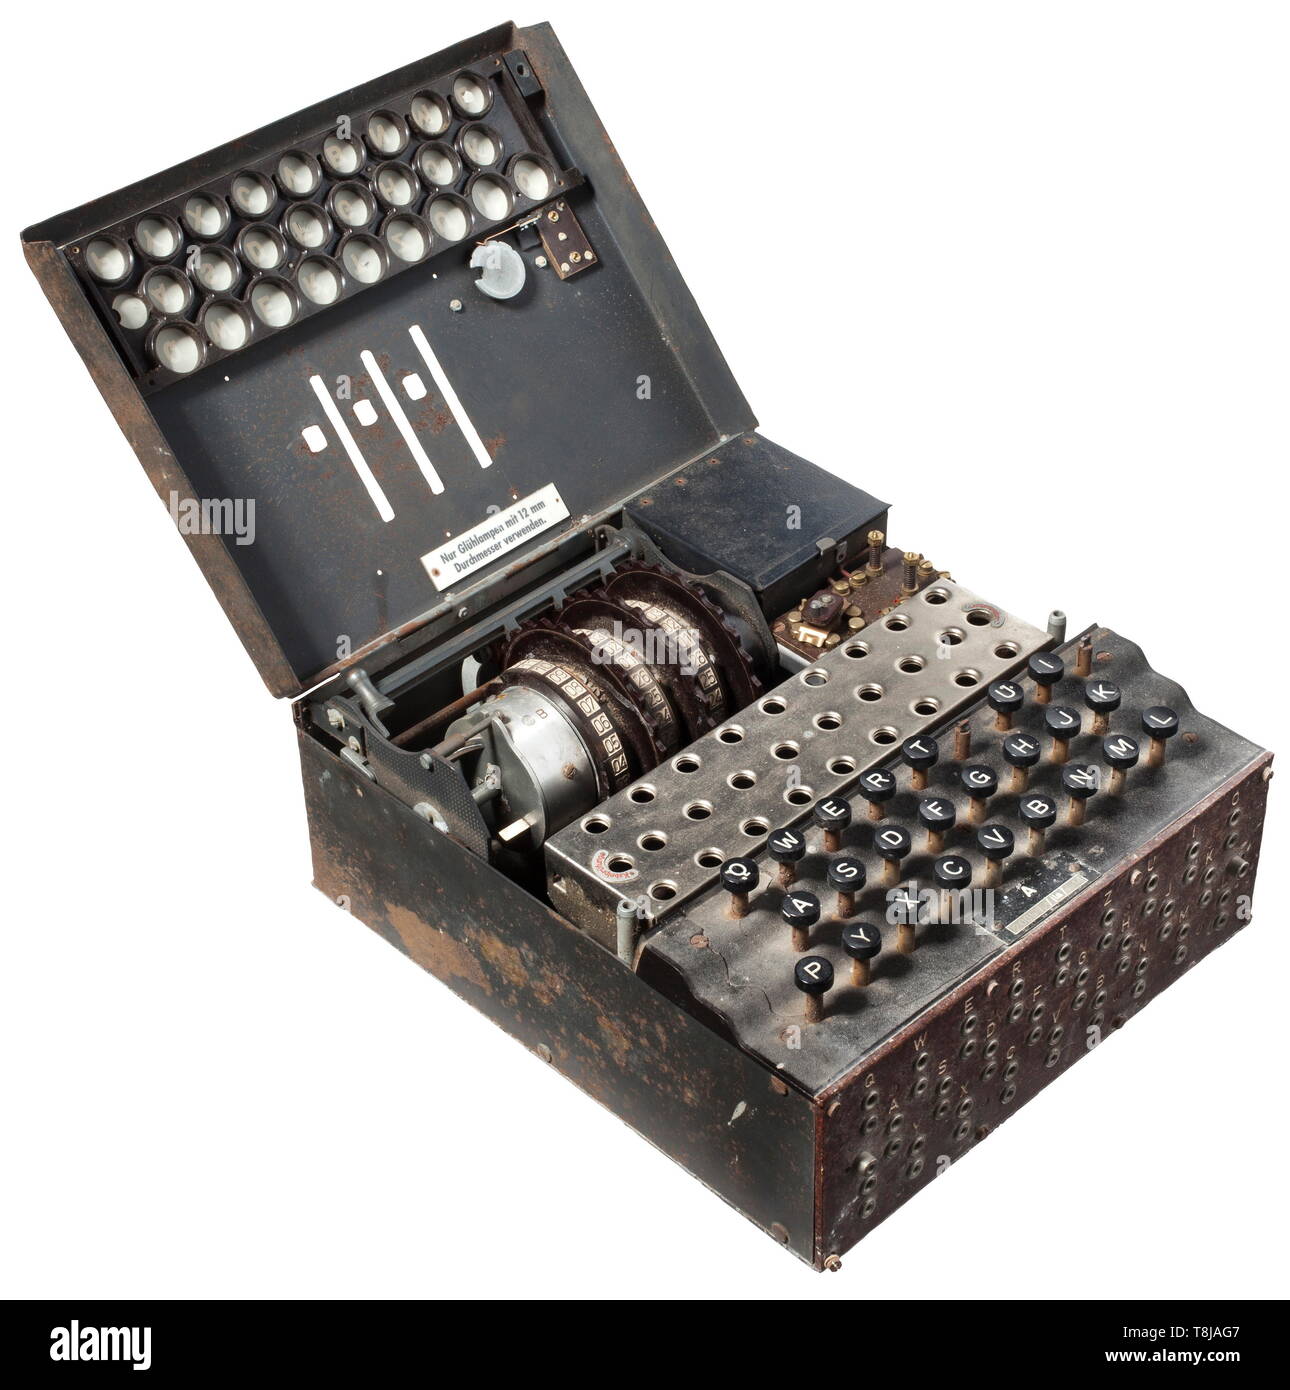 A German cypher machine 'Enigma I', Luftwaffe issue, 1944, model no. '20057', manufacturer 'jla' (Cypher Machine Company Heimsoeth und Rinke, Berlin) Three scrambling rotors with the numeric keys 1 to 26, the aluminium rotor assembly each with matching numbers 'A 20057'. In a light alloy box lacquered in field-grey with the handwritten number '20057' on the underside. The hinged lid with keyboard, power switch, and screw type terminals for external power supply. Partly functioning keyboard (two keys missing), plugboard at the front. Size 26 x 29 x ca. 13 cm. Untouched find , Editorial-Use-Only Stock Photo